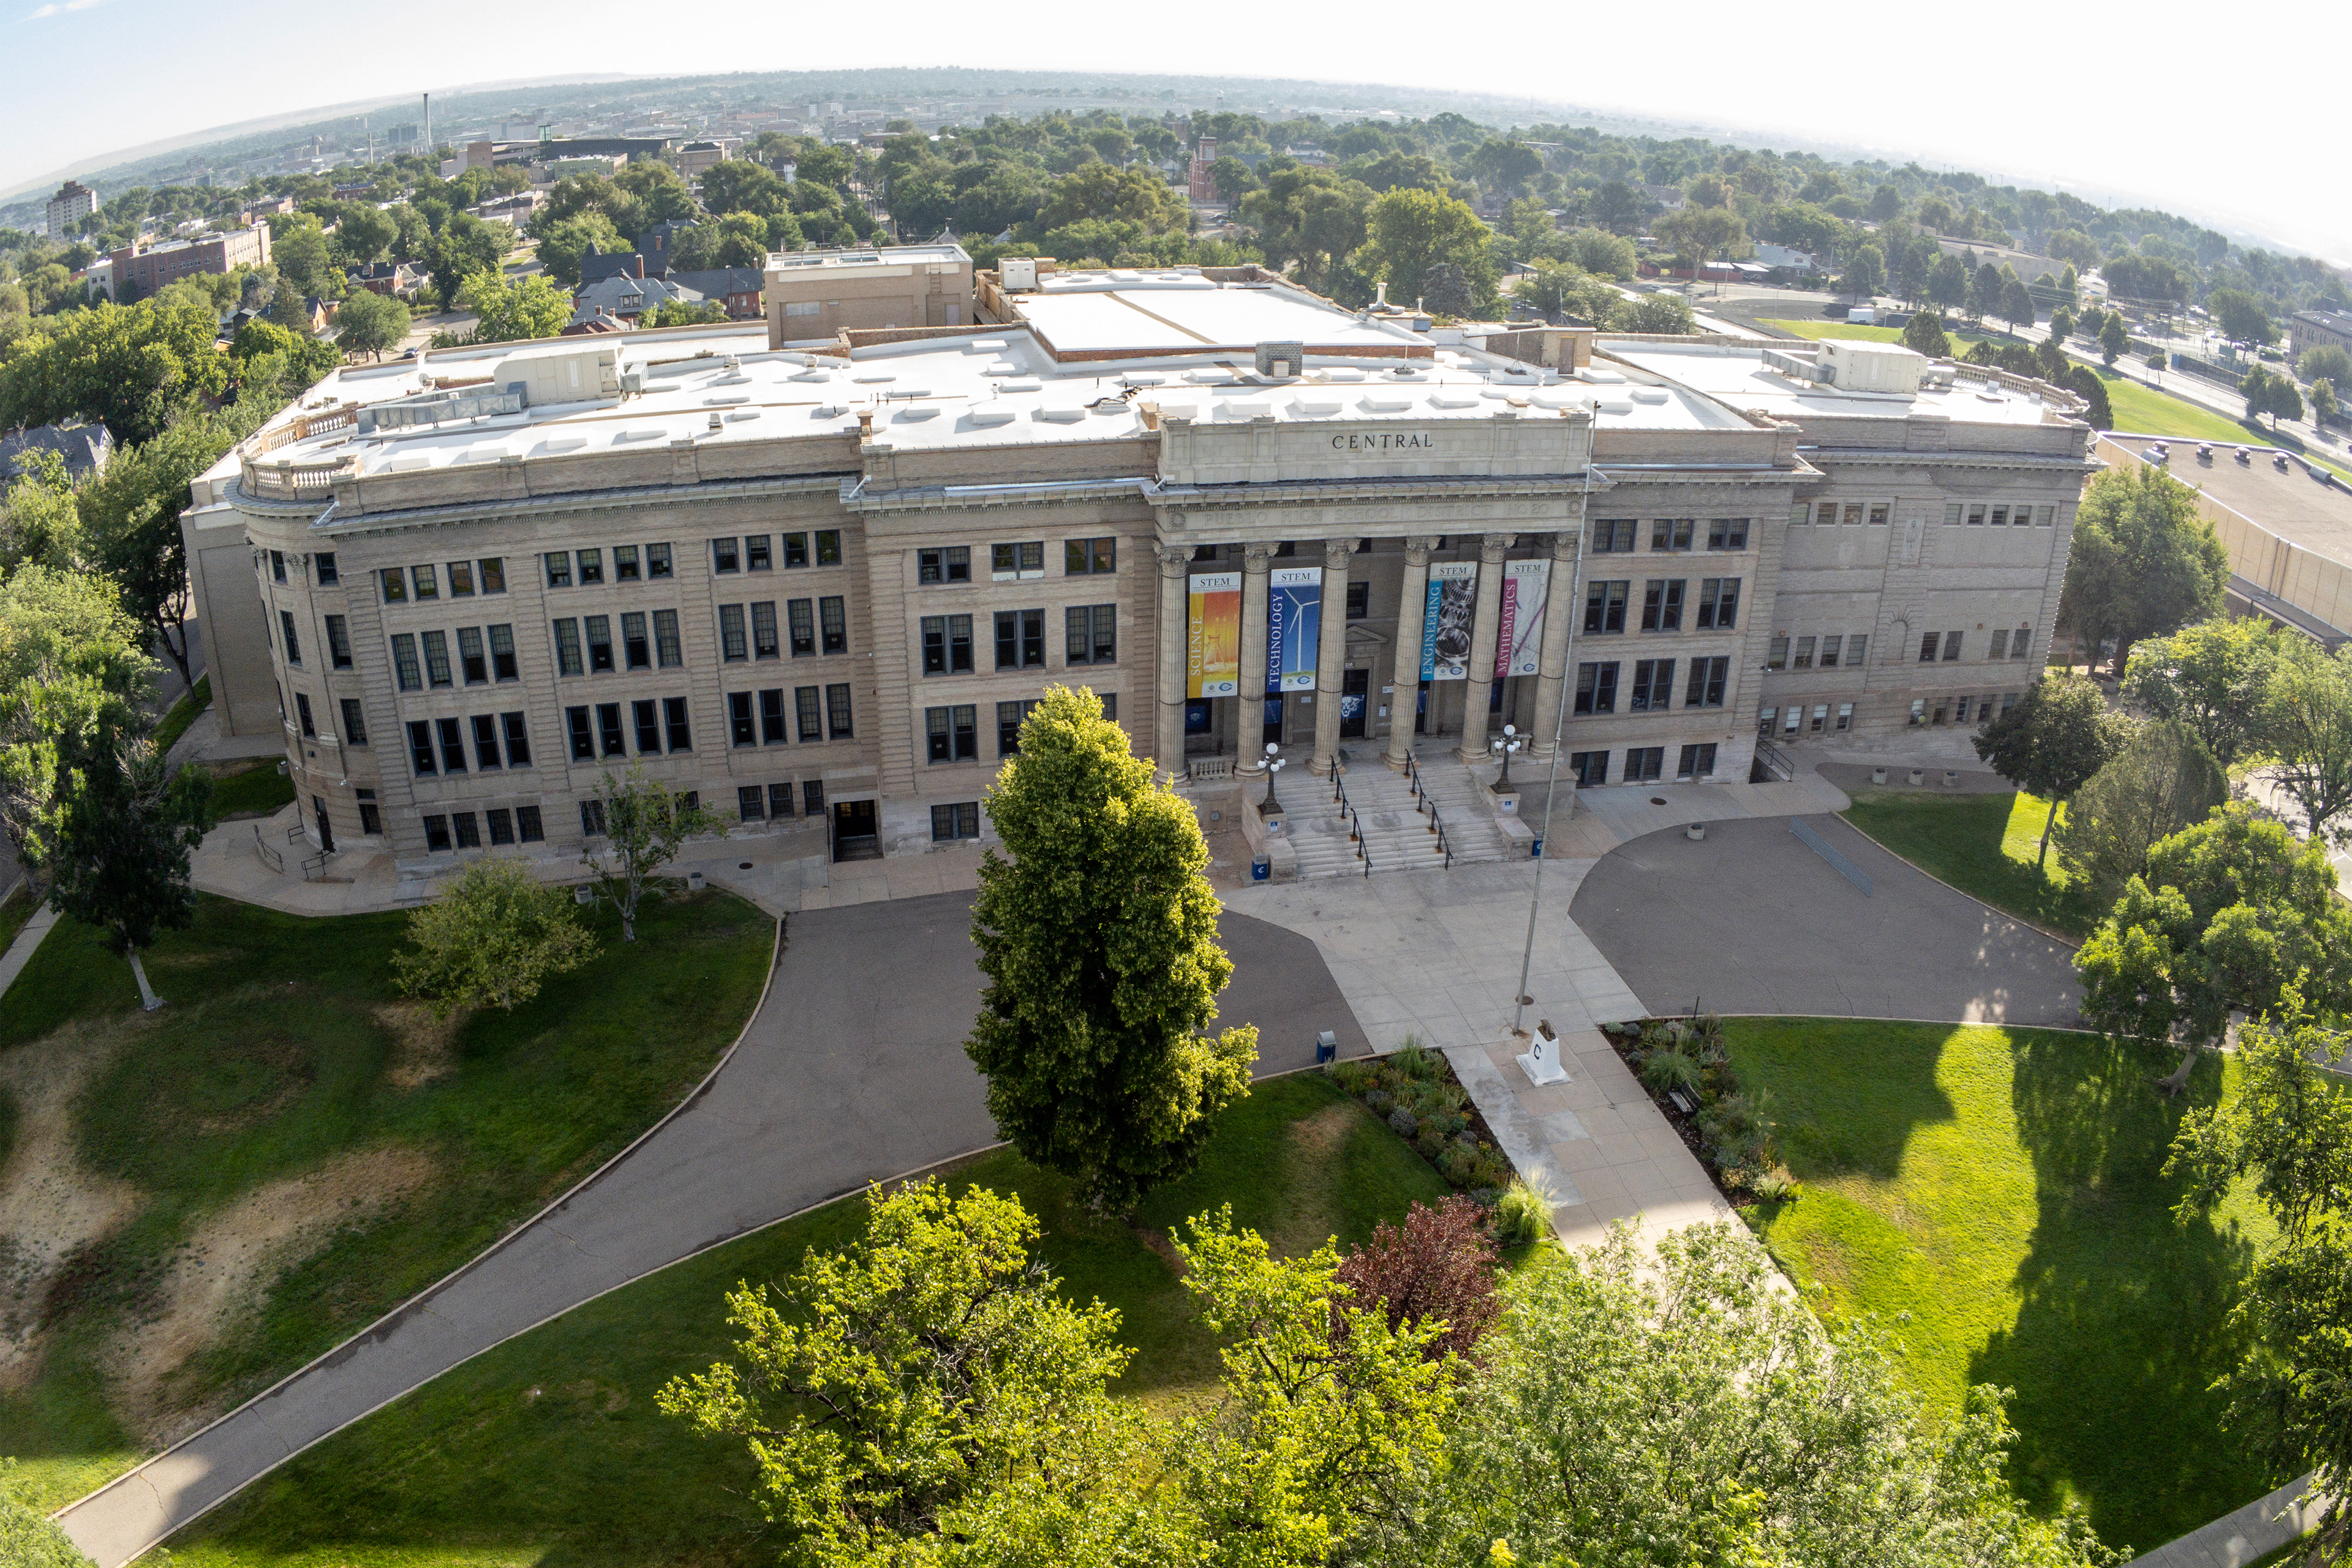 An image of a high school building and its surrounding campus, taken via a drone camera.